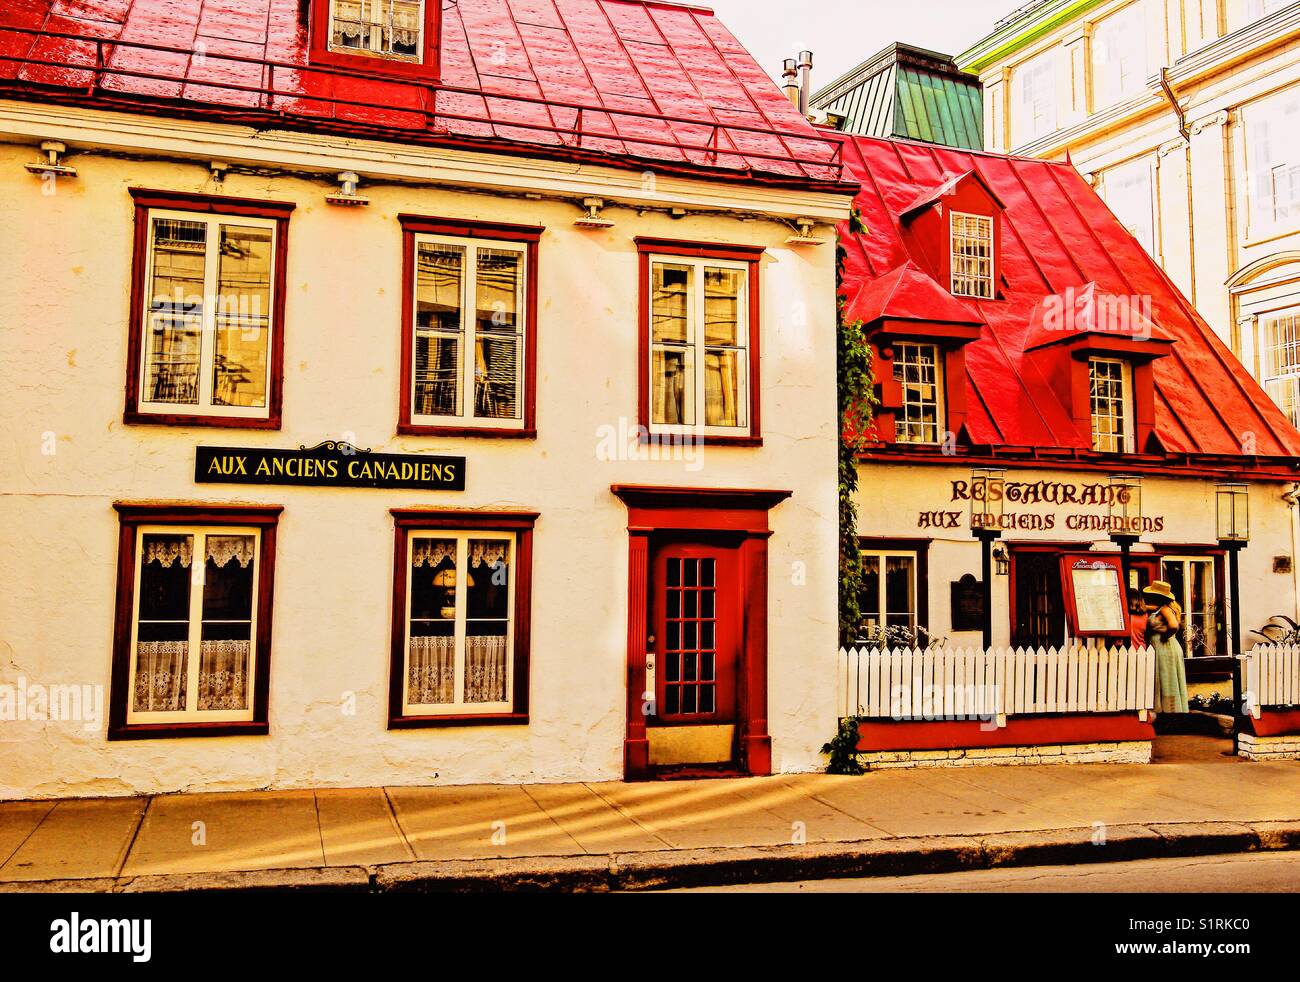 Restaurant Aux Anciens Canadiens, Quebec City, Quebec, Canada. Built in 1675-76 and formerly known as Maison Jaquet it has been a restaurant since 1966. Stock Photo